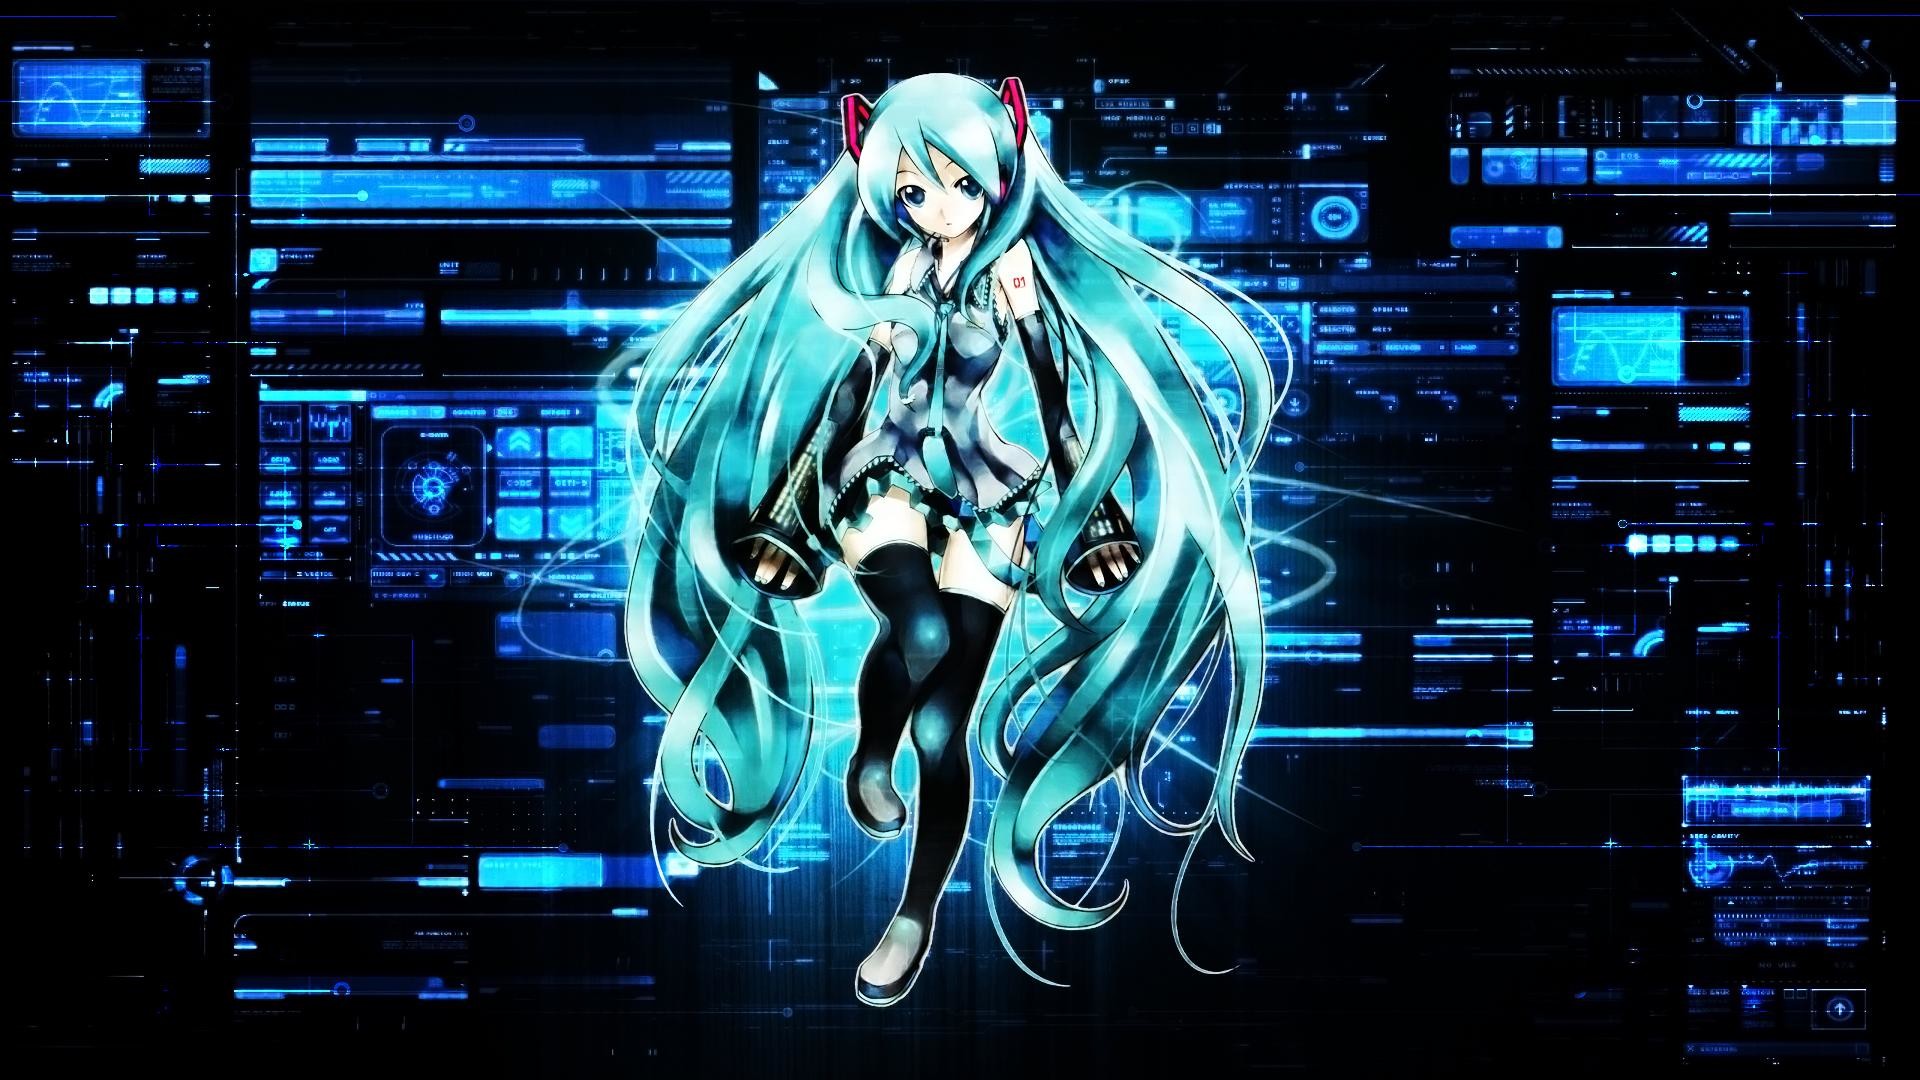 Hatsune Miku Wallpaper by Eiswolfi on DeviantArt HD Wallpapers Pinterest Hatsune miku, Wallpaper and Wallpaper backgrounds